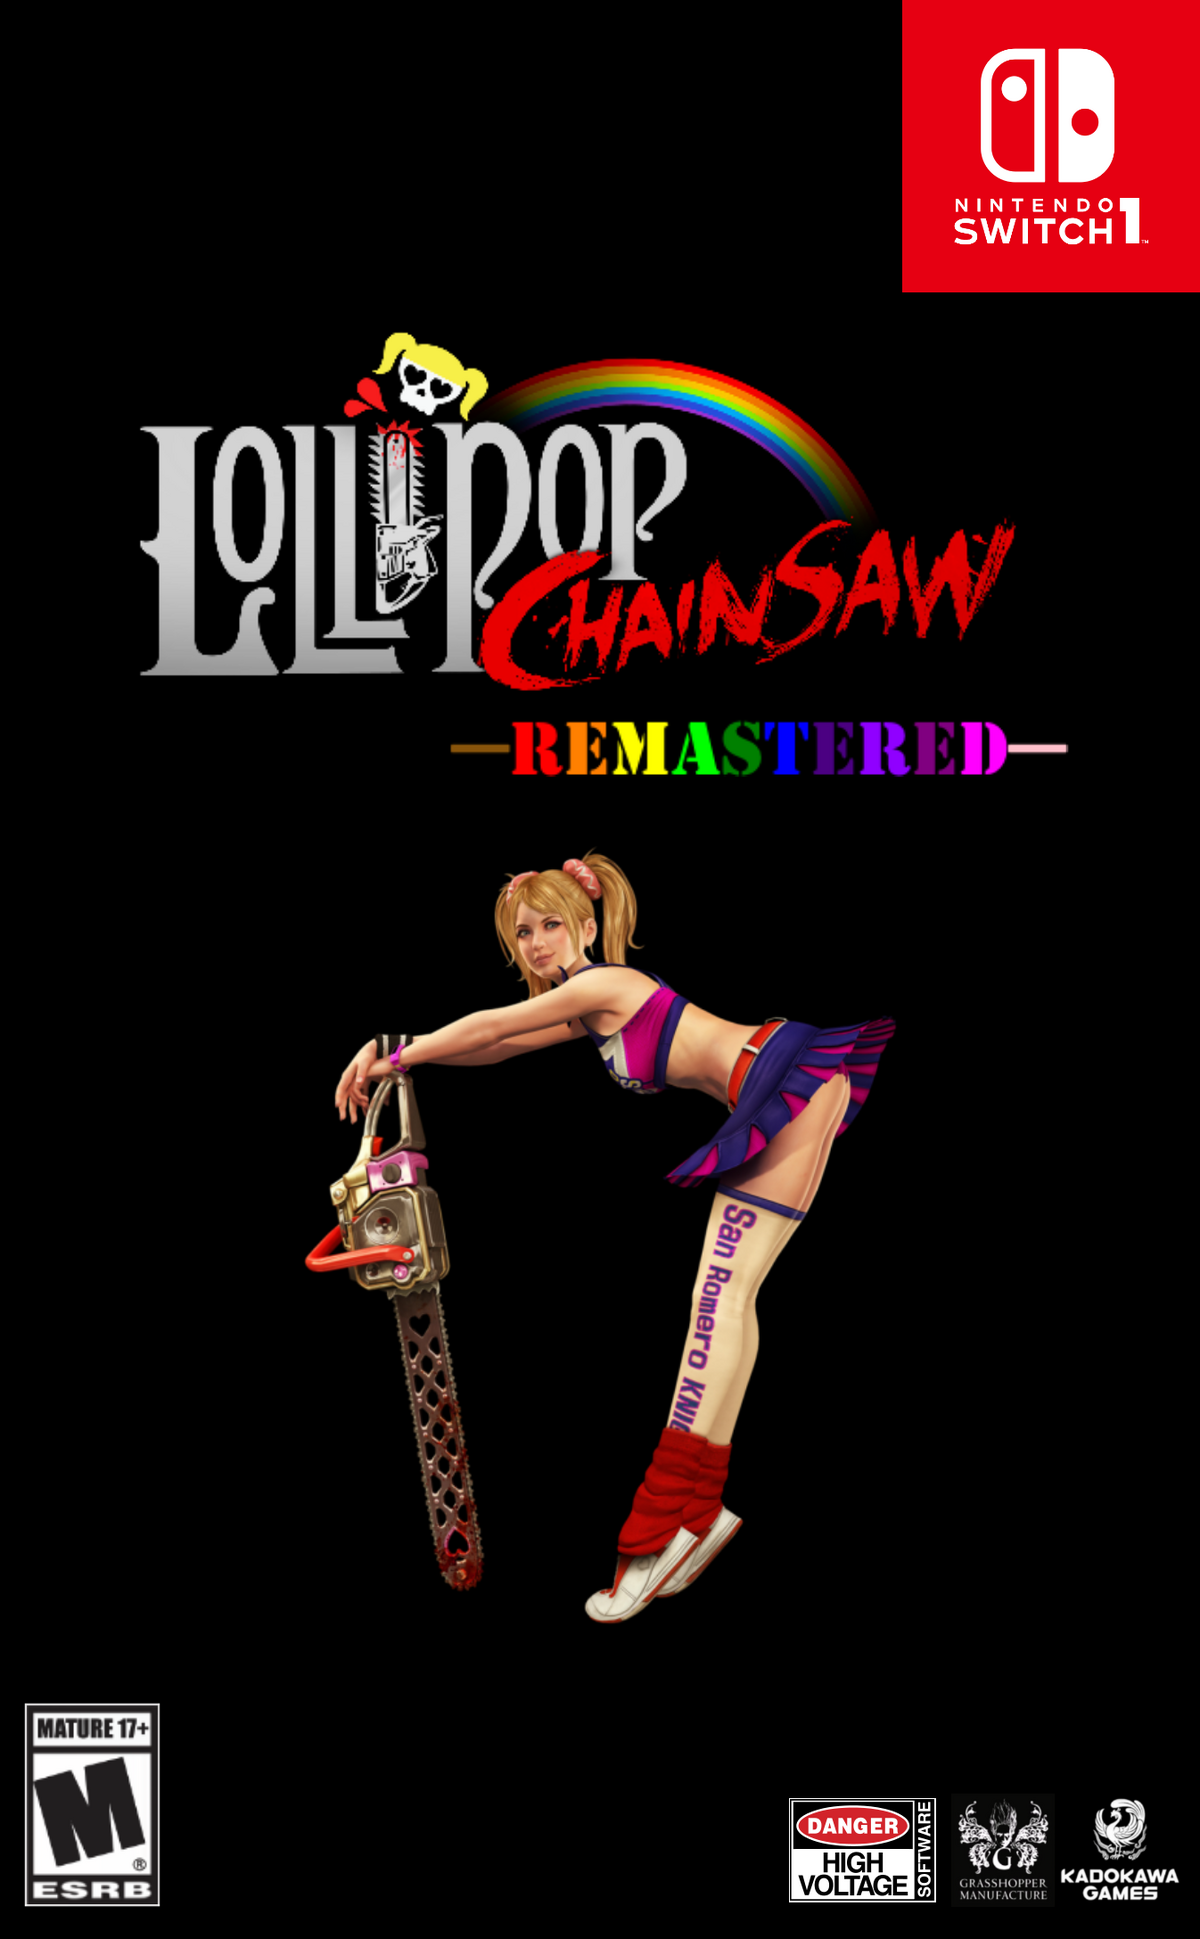 Lollipop Chainsaw Remake Announced, Promises A More Realistic Approach to  Graphics, Fans Fear Censorship - Bounding Into Comics